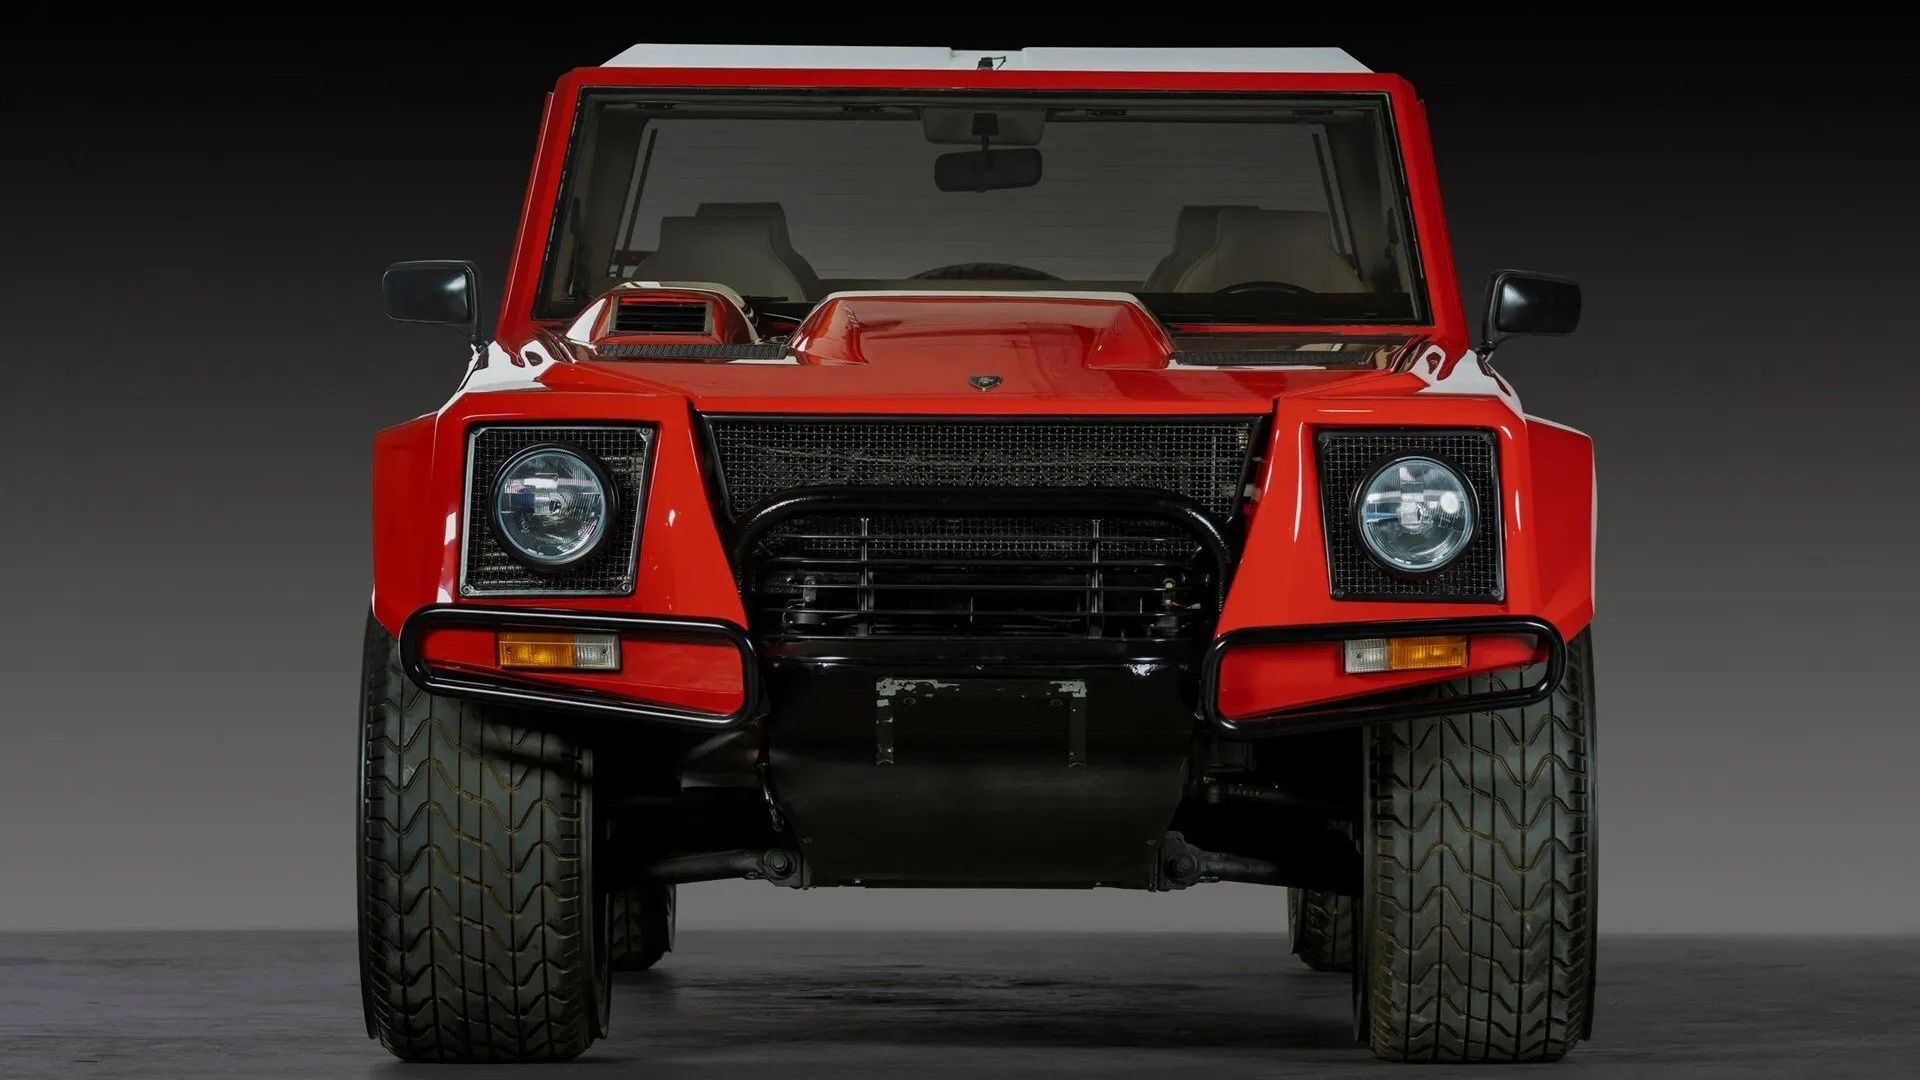 Frontal shot of a red 1991 Lamborghini LM002